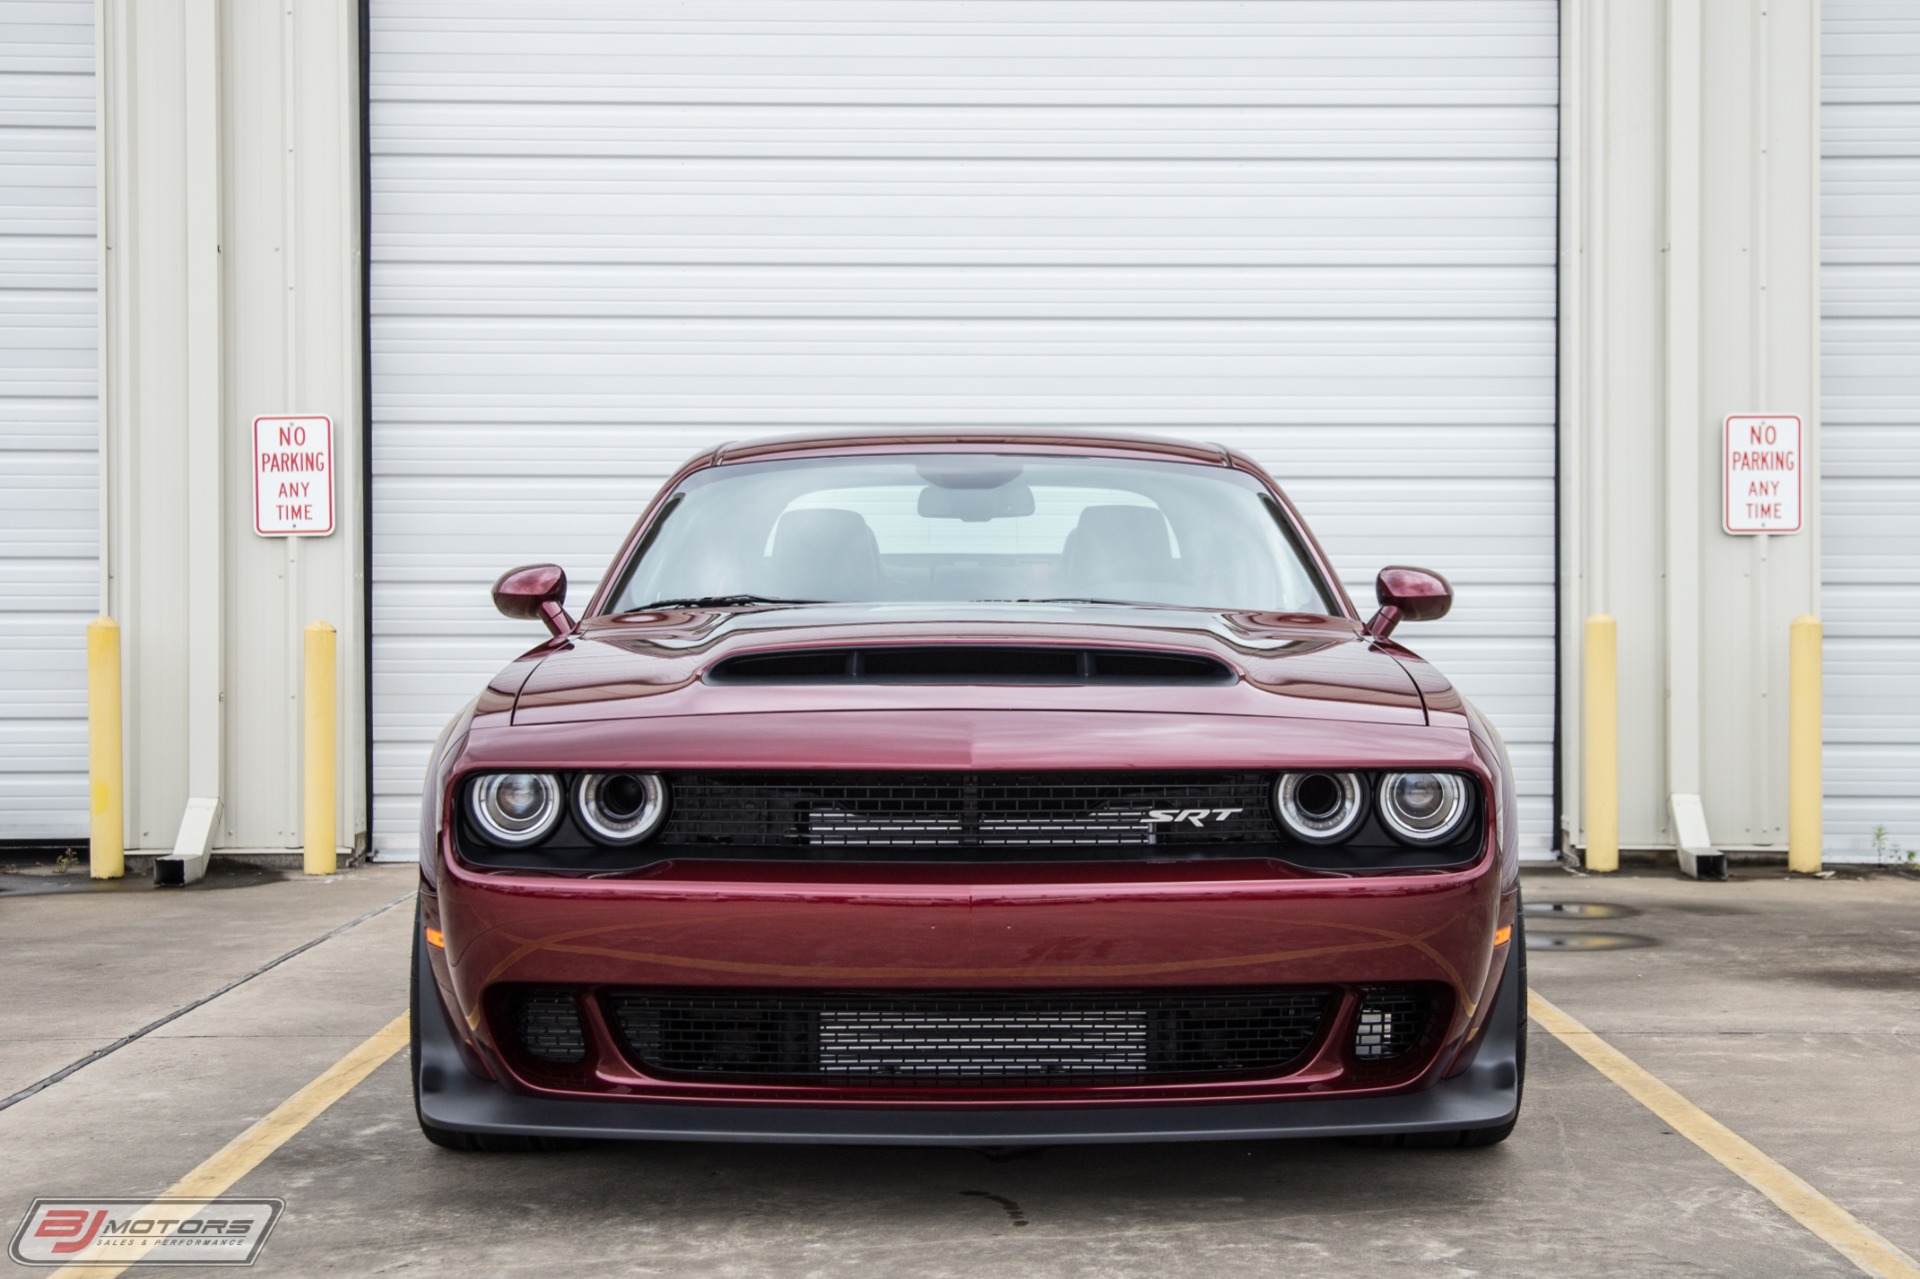 Used-2018-Dodge-Challenger-SRT-Demon-Only-40-Miles-comes-with-Crate